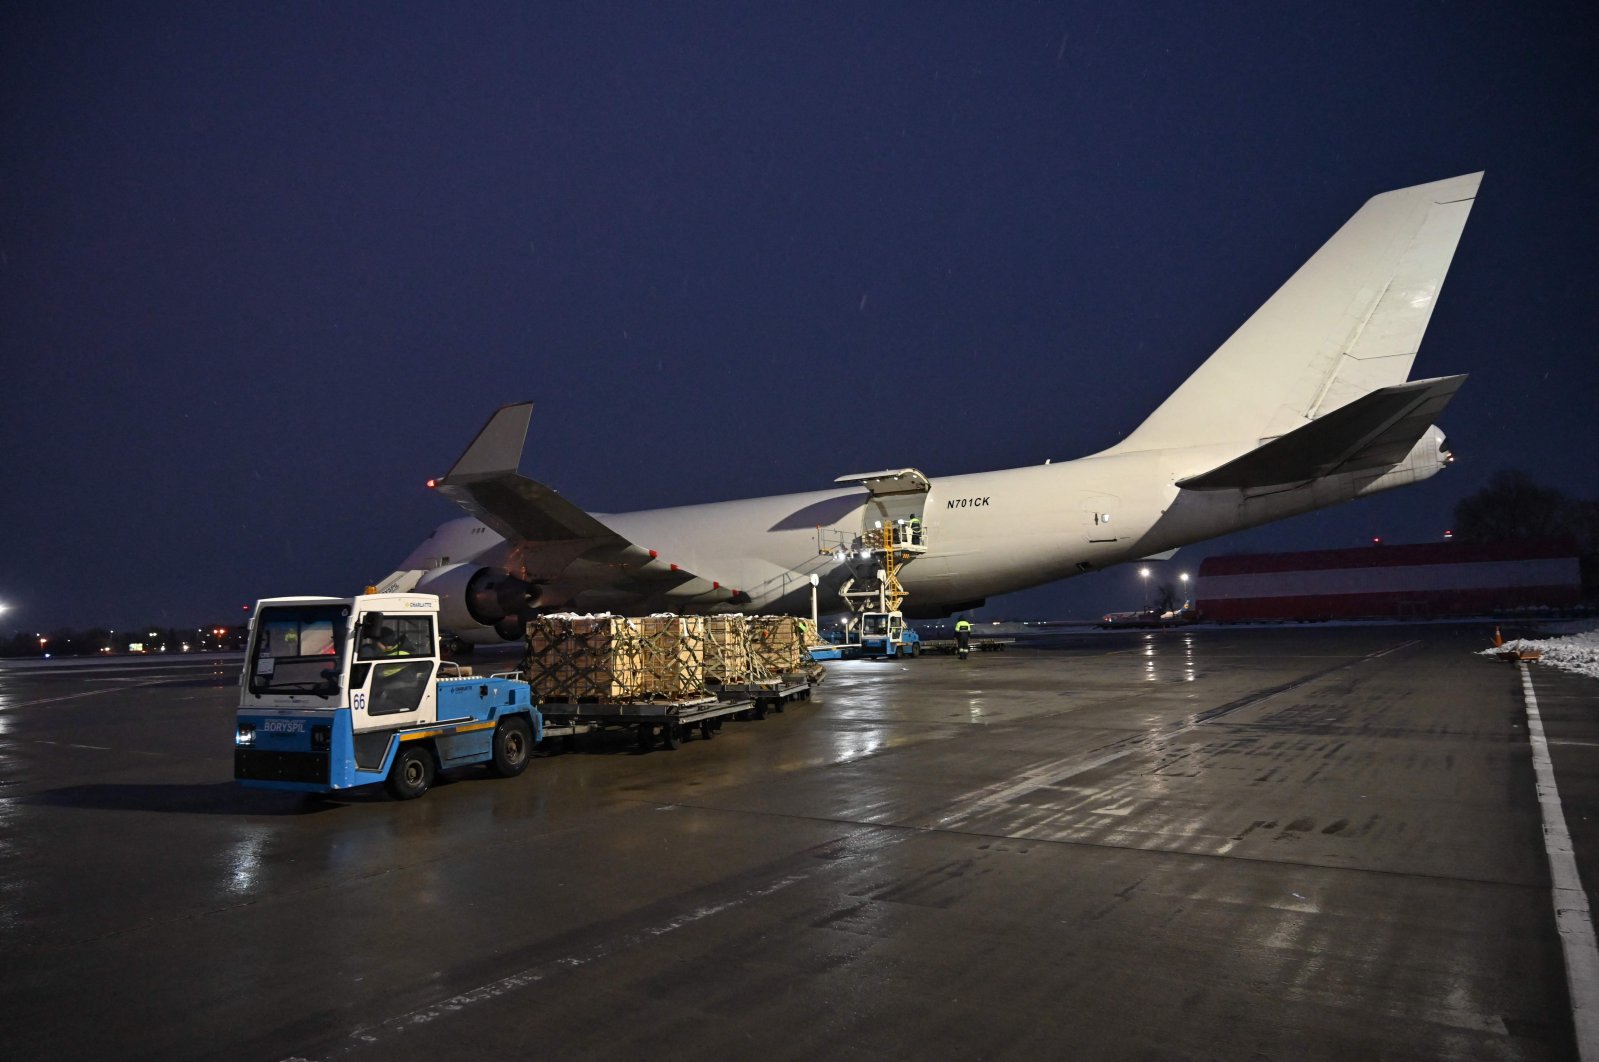 Employees unload a plane carrying U.S. military aid at Boryspil airport in Kyiv, Ukraine, Feb. 5, 2022. (Photo by GENYA SAVILOV / AFP)